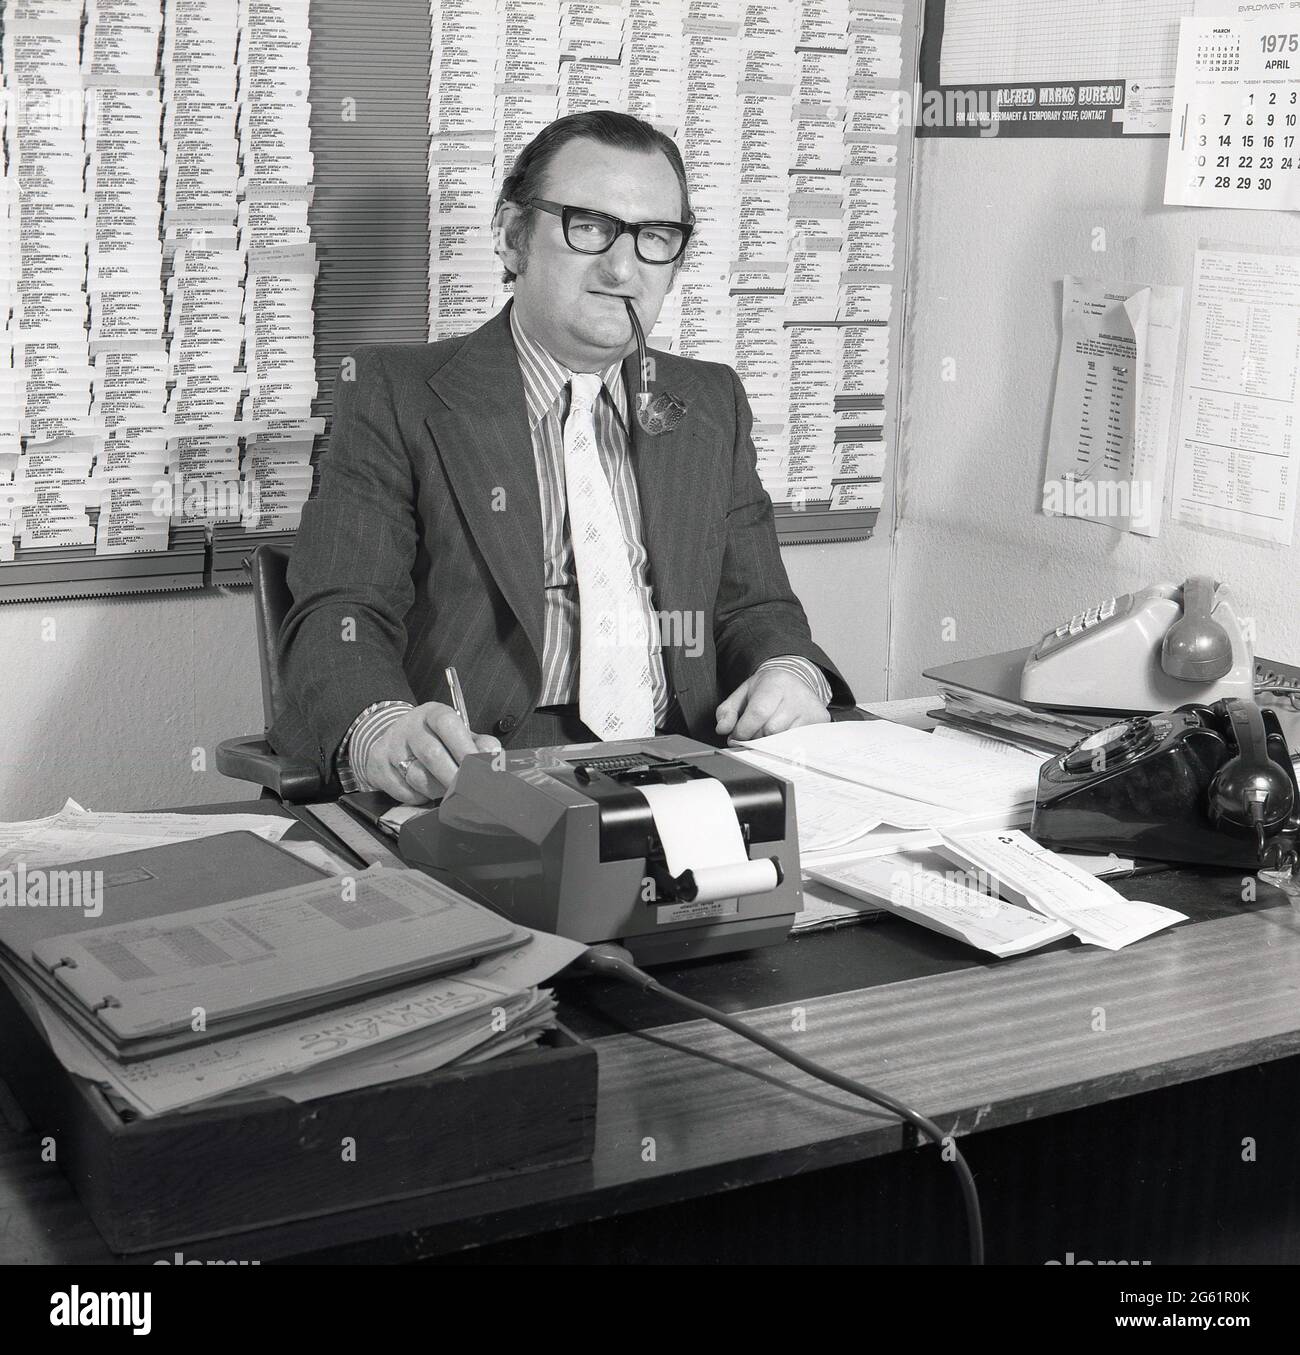 1970s, historical, inside an office, sitting at his desk, parker pen in hand and smoking a pipe, a suited executive working in auto finance, with two telephones, paperwork and a mechanical adding machine around him, Croydon, England, UK. A walled customer/supplier card index is on the wall behind him. The financing of motor cars is big business. GMAC, an acronym for General Motors Acceptance Corporation was founded in 1919 and was part of the US car giant, General Motors, who owned the Vauxhall car brand in the UK, which they had acquired in 1925. Stock Photo